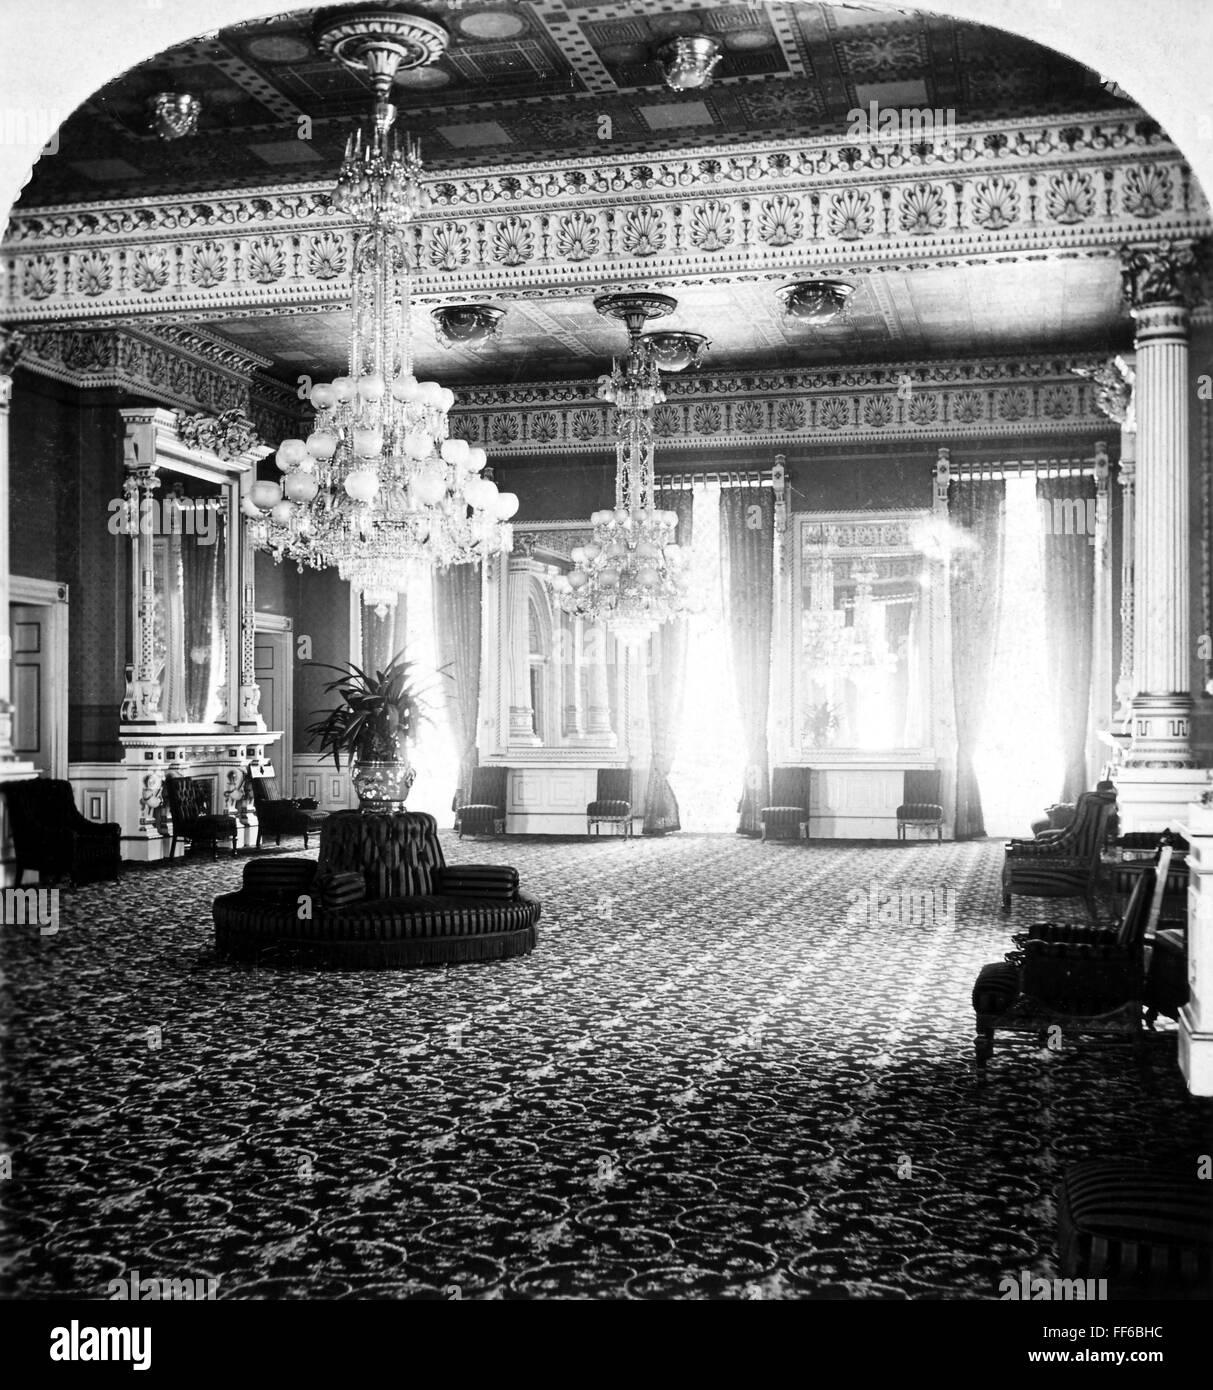 WHITE HOUSE: EAST ROOM. /nA view of the East Room of the White House as redecorated by President and Mrs. Ulysses S. Grant in 1873 with patterned carpet, wall coverings and gas chandeliers. Photographed in 1898. Stock Photo